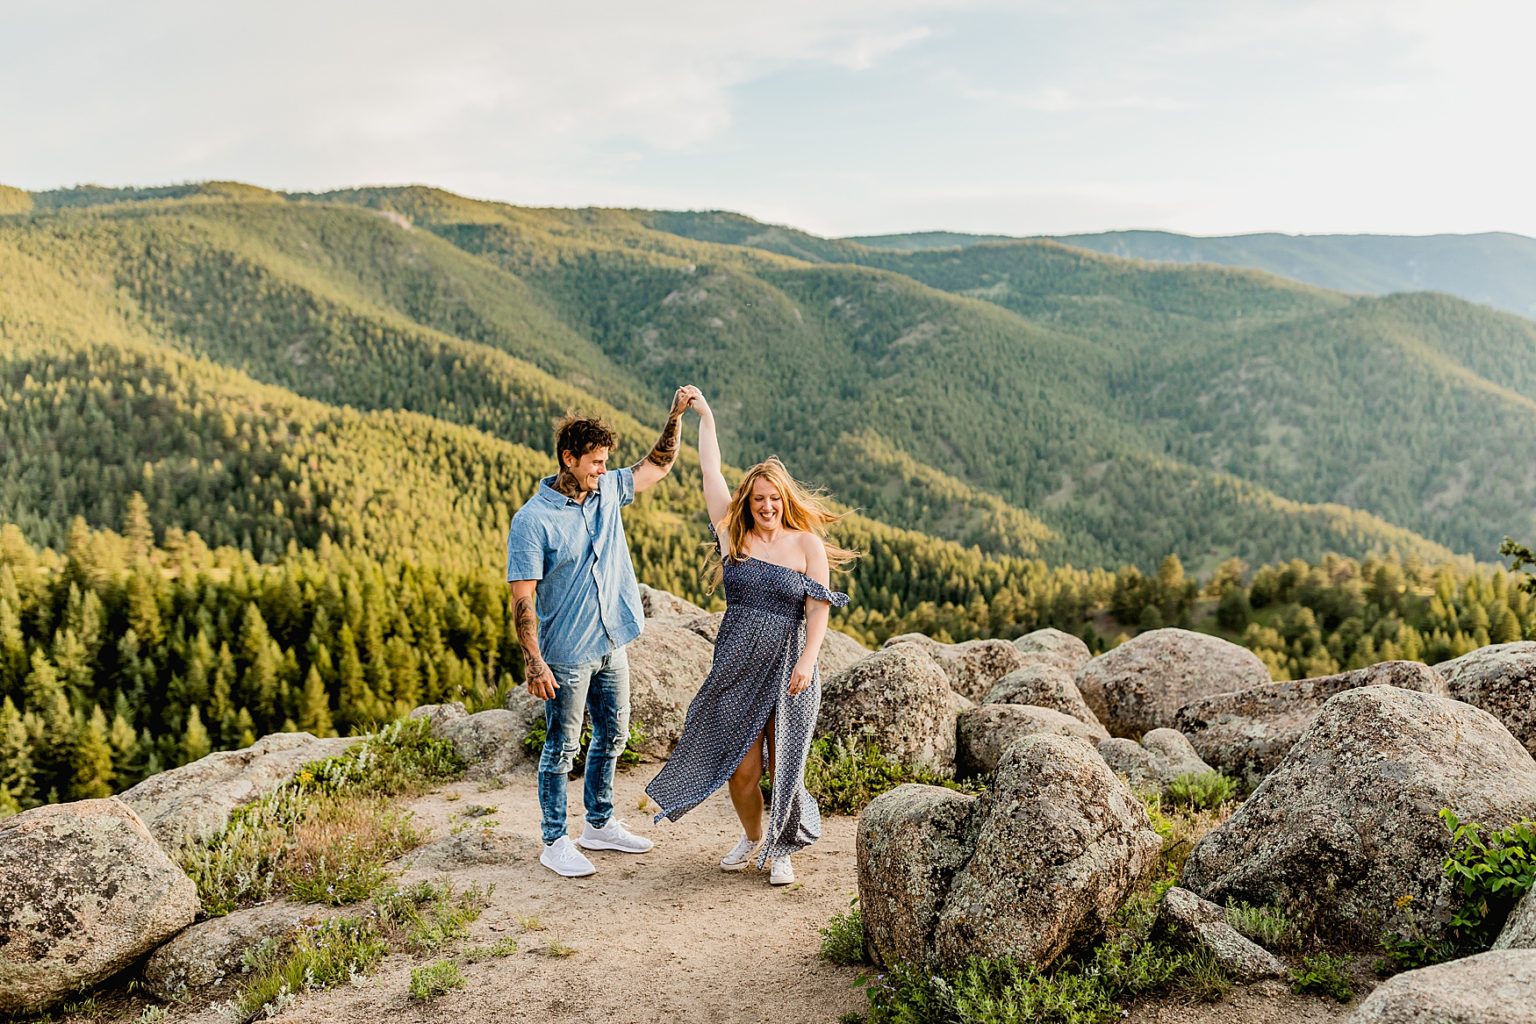 couple dances together surrounded by rocks and gorgeous green mountain scenery